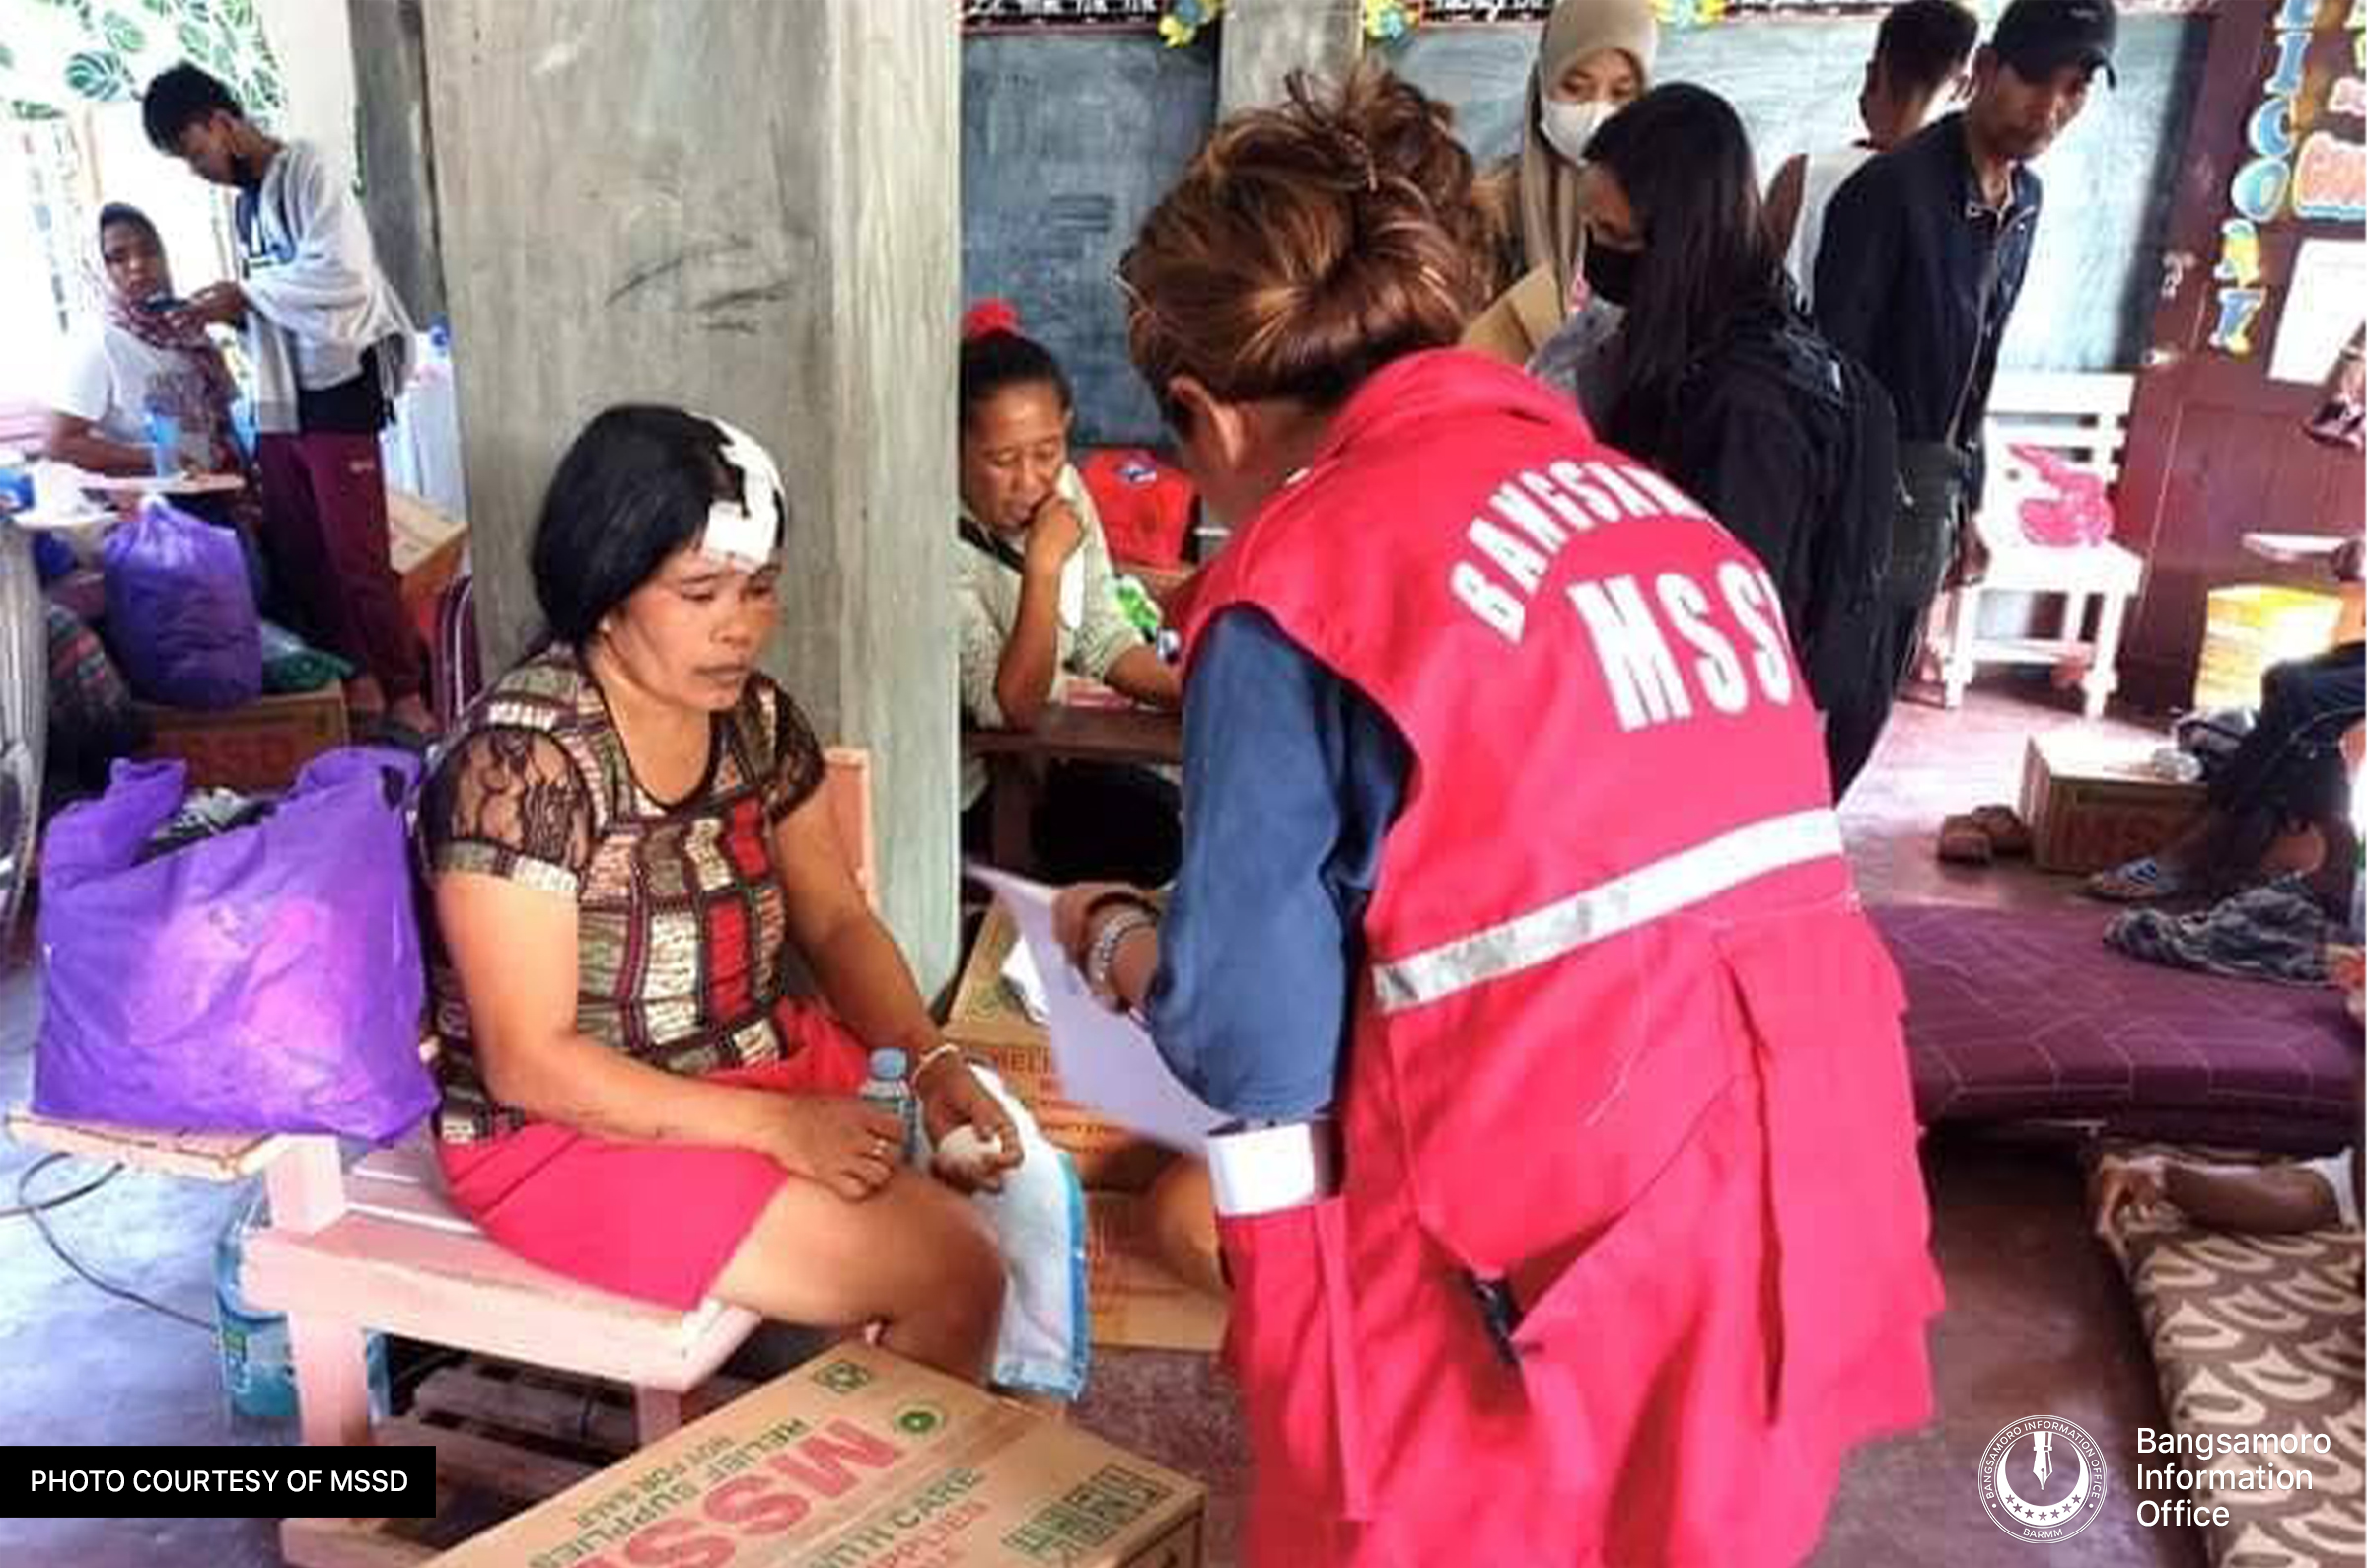 Relief Assistance From Barmm Govt Continues To Pour For ‘paeng